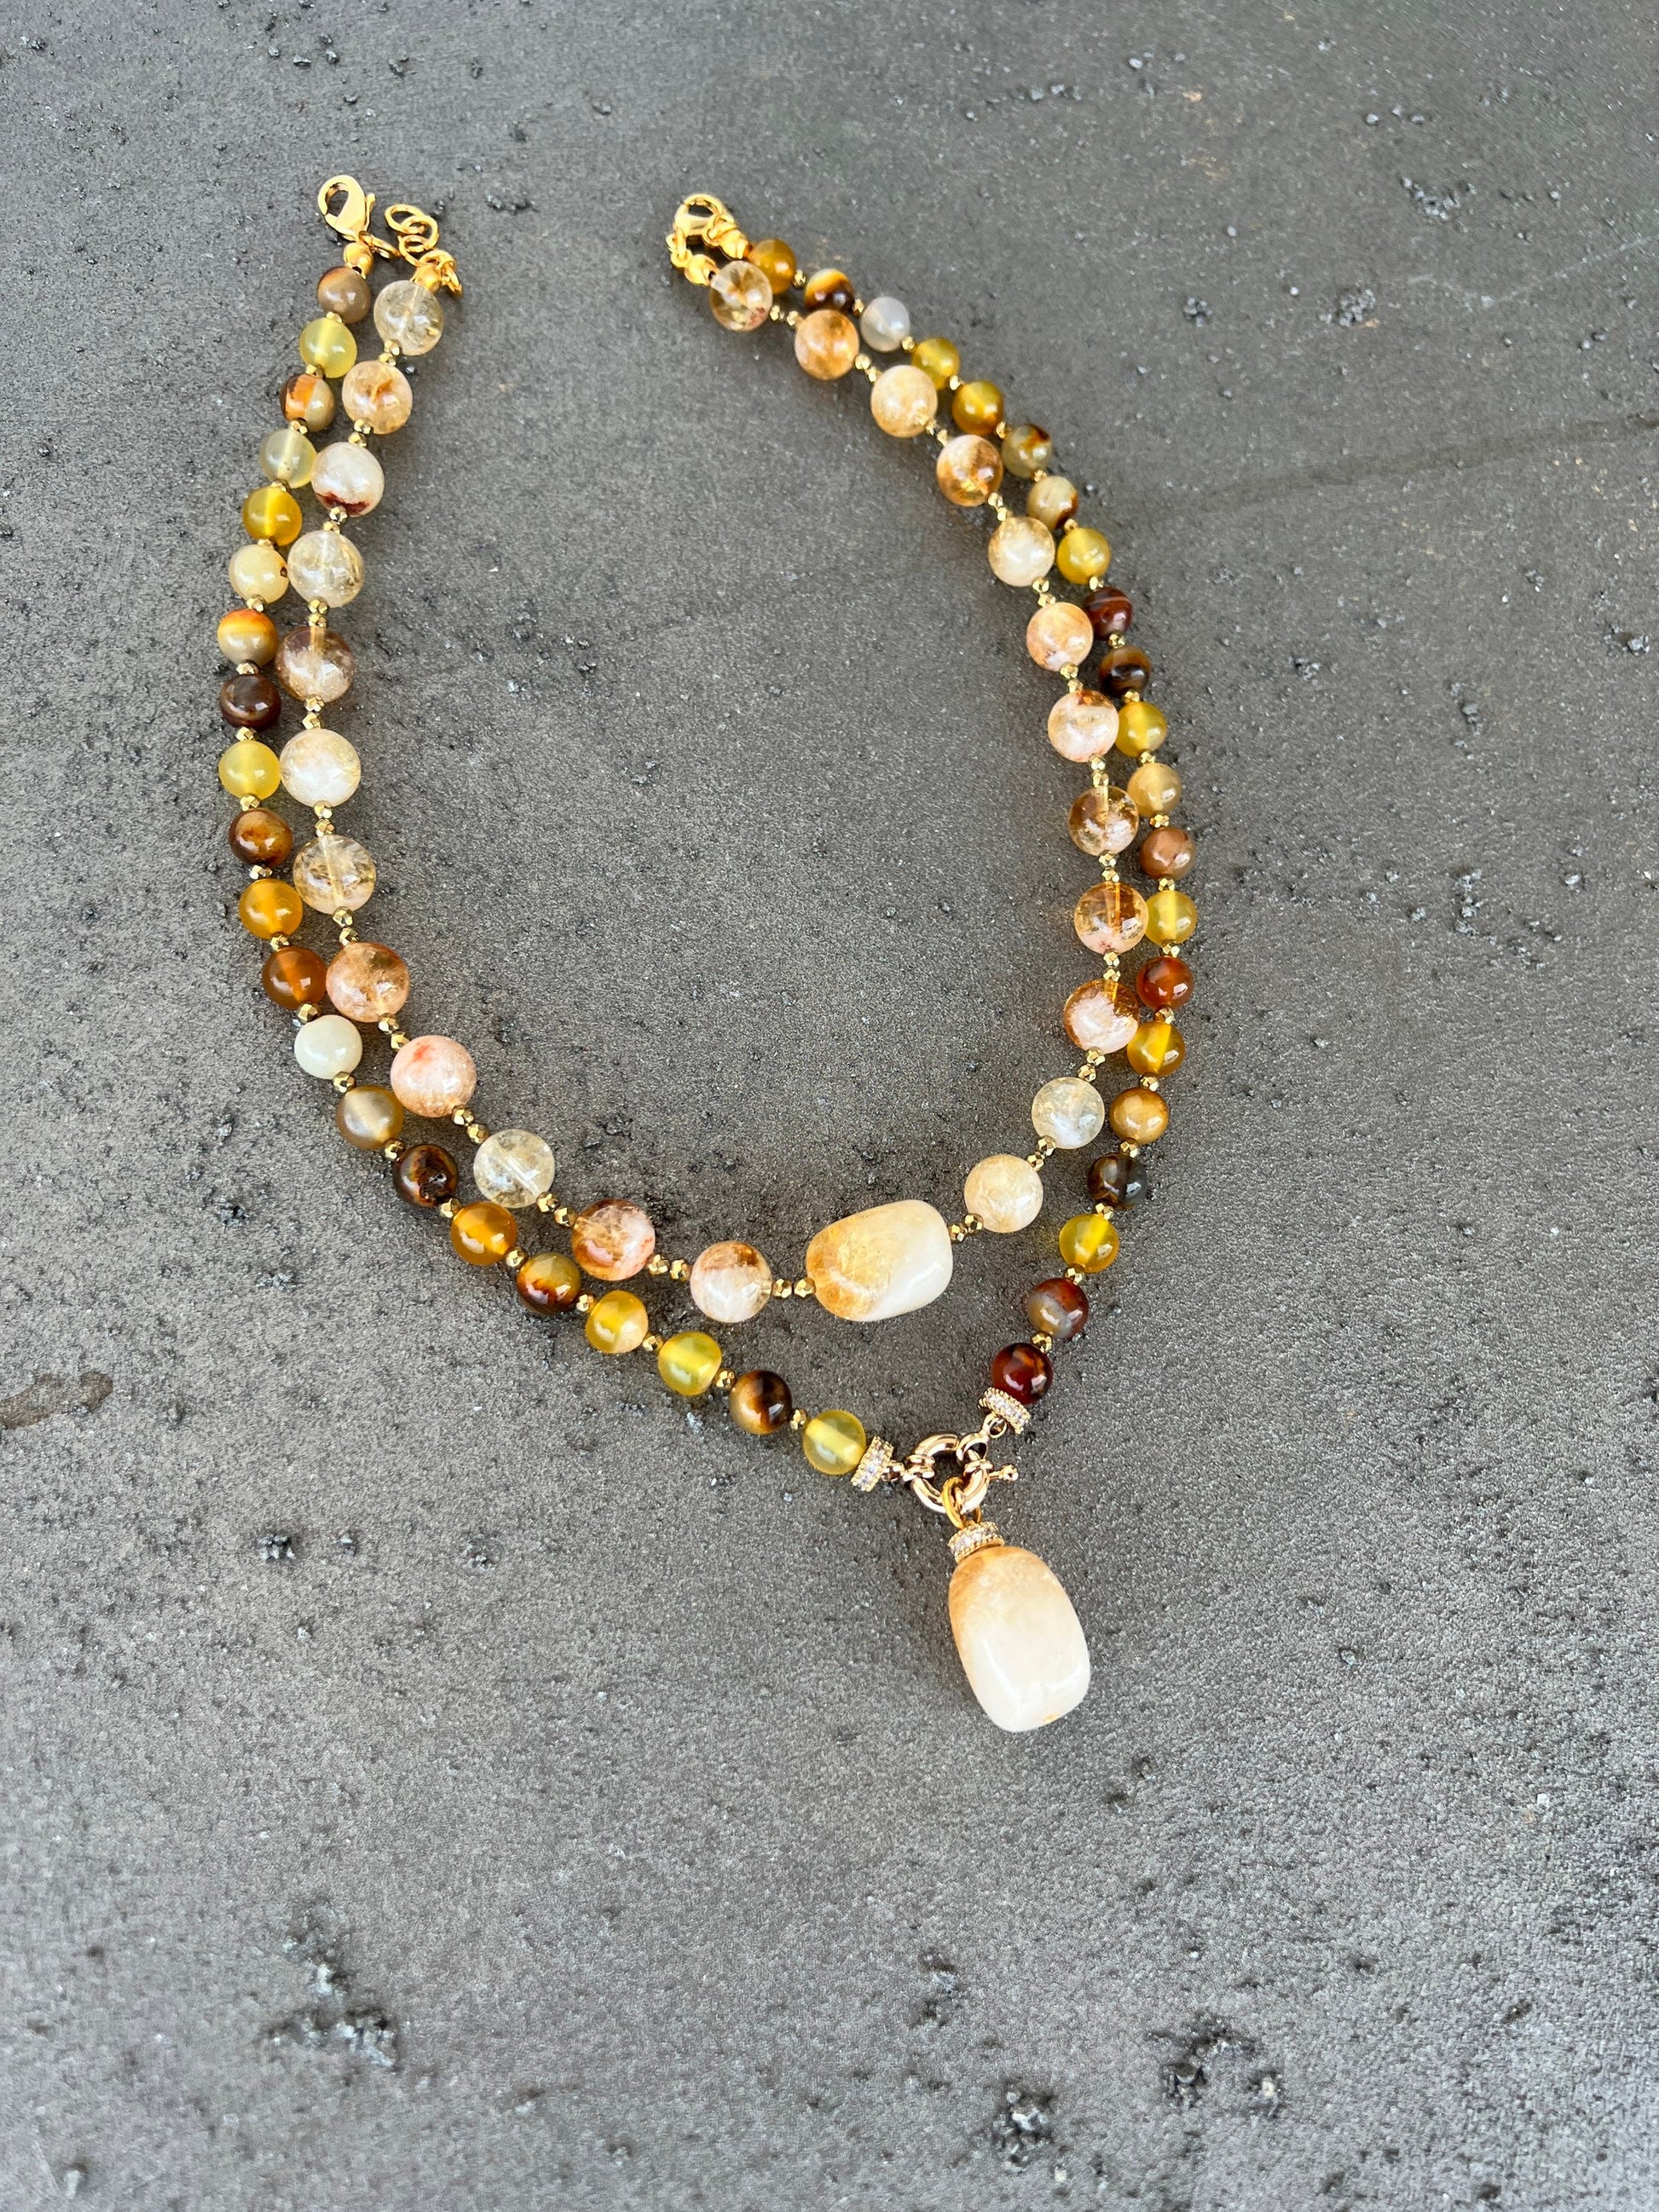 Citrine Necklace, Unique Citrine and Yellow Agate Necklace, Beaded Handmade Gemstone Jewelry, Christmas Gift for Women, Beaded Gifts